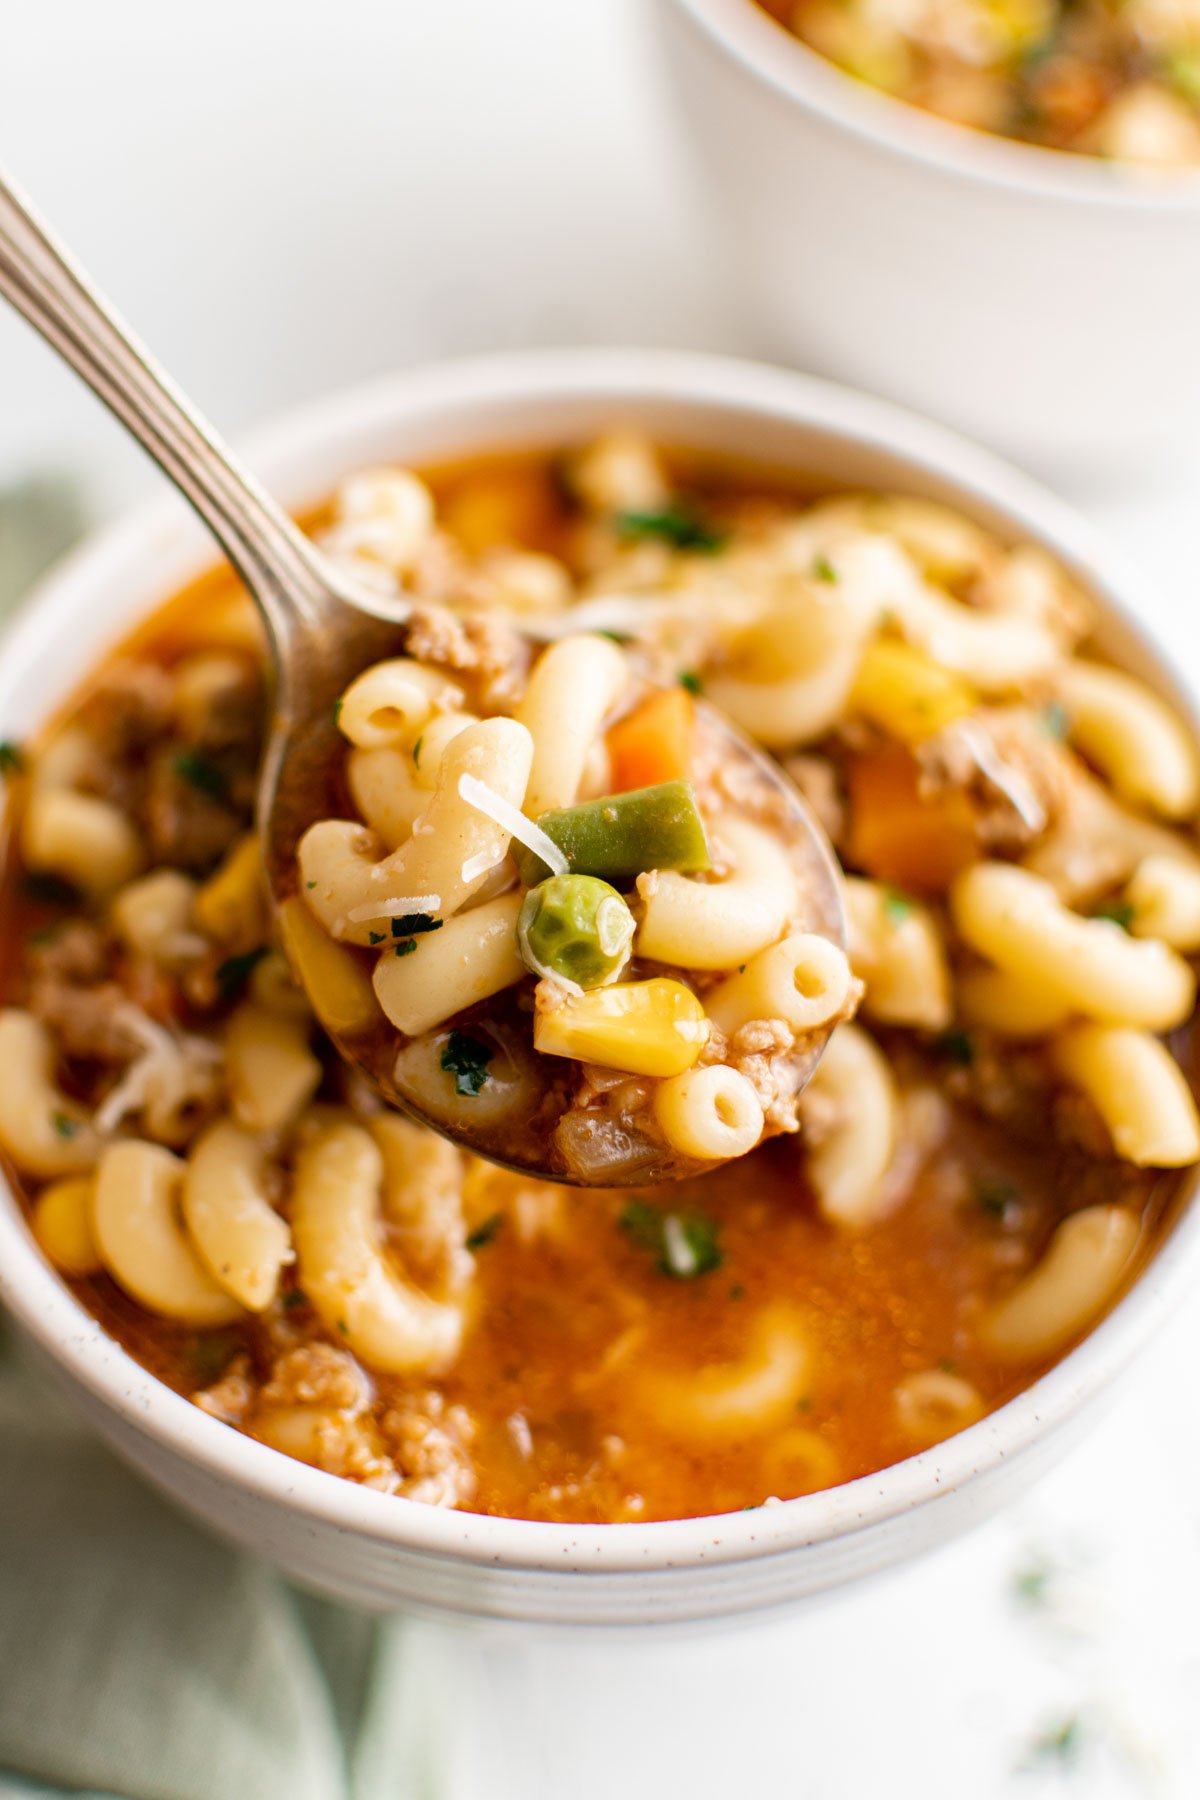 Bowl of hamburger Soup with Macaroni and a spoon.